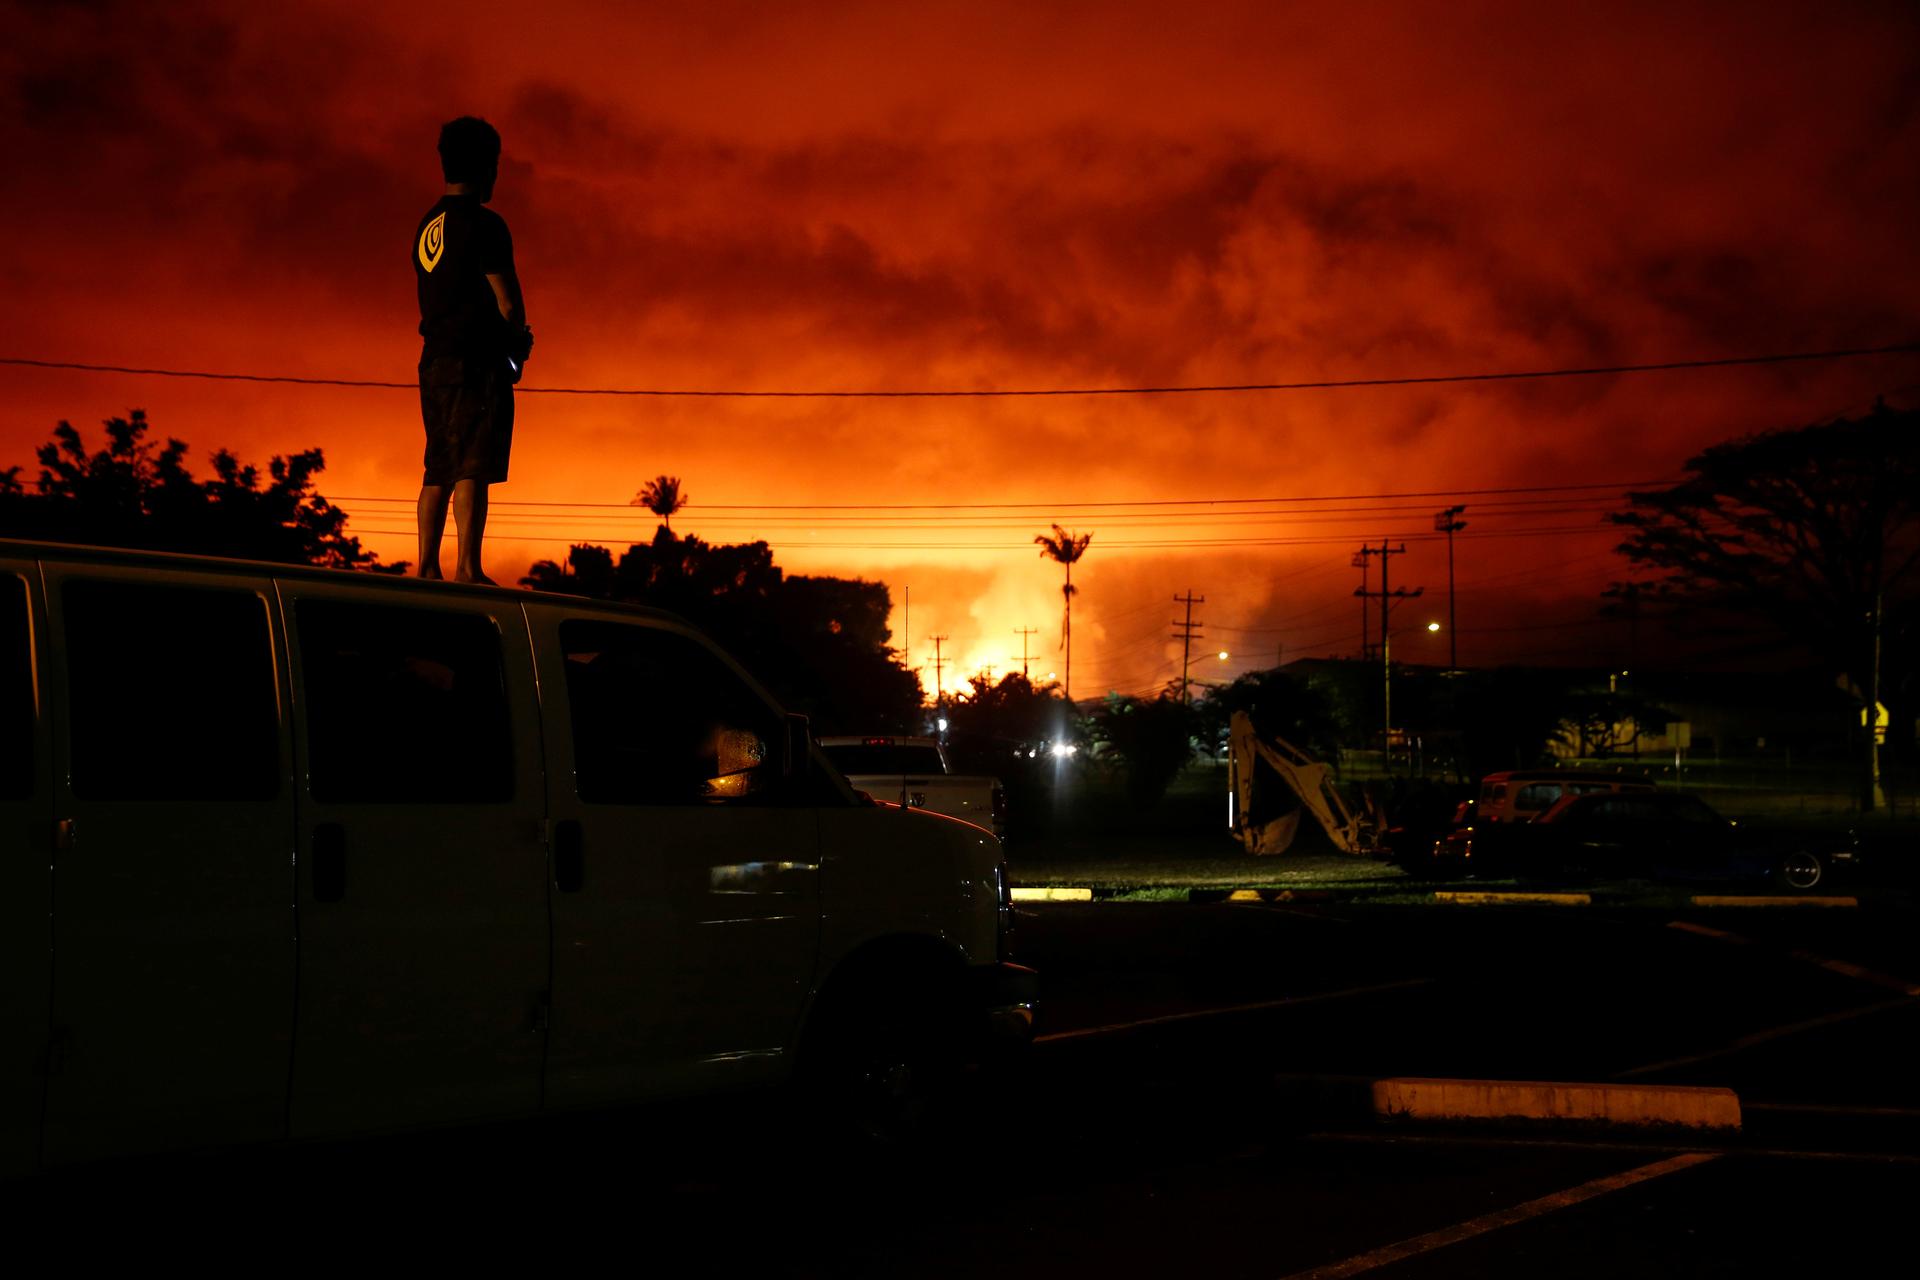 Darryl Sumiki, 52, of Hilo, stands atop a car and watches as lava lights up the sky in bright red above Pahoa during ongoing eruptions of the Kilauea Volcano in Hawaii.